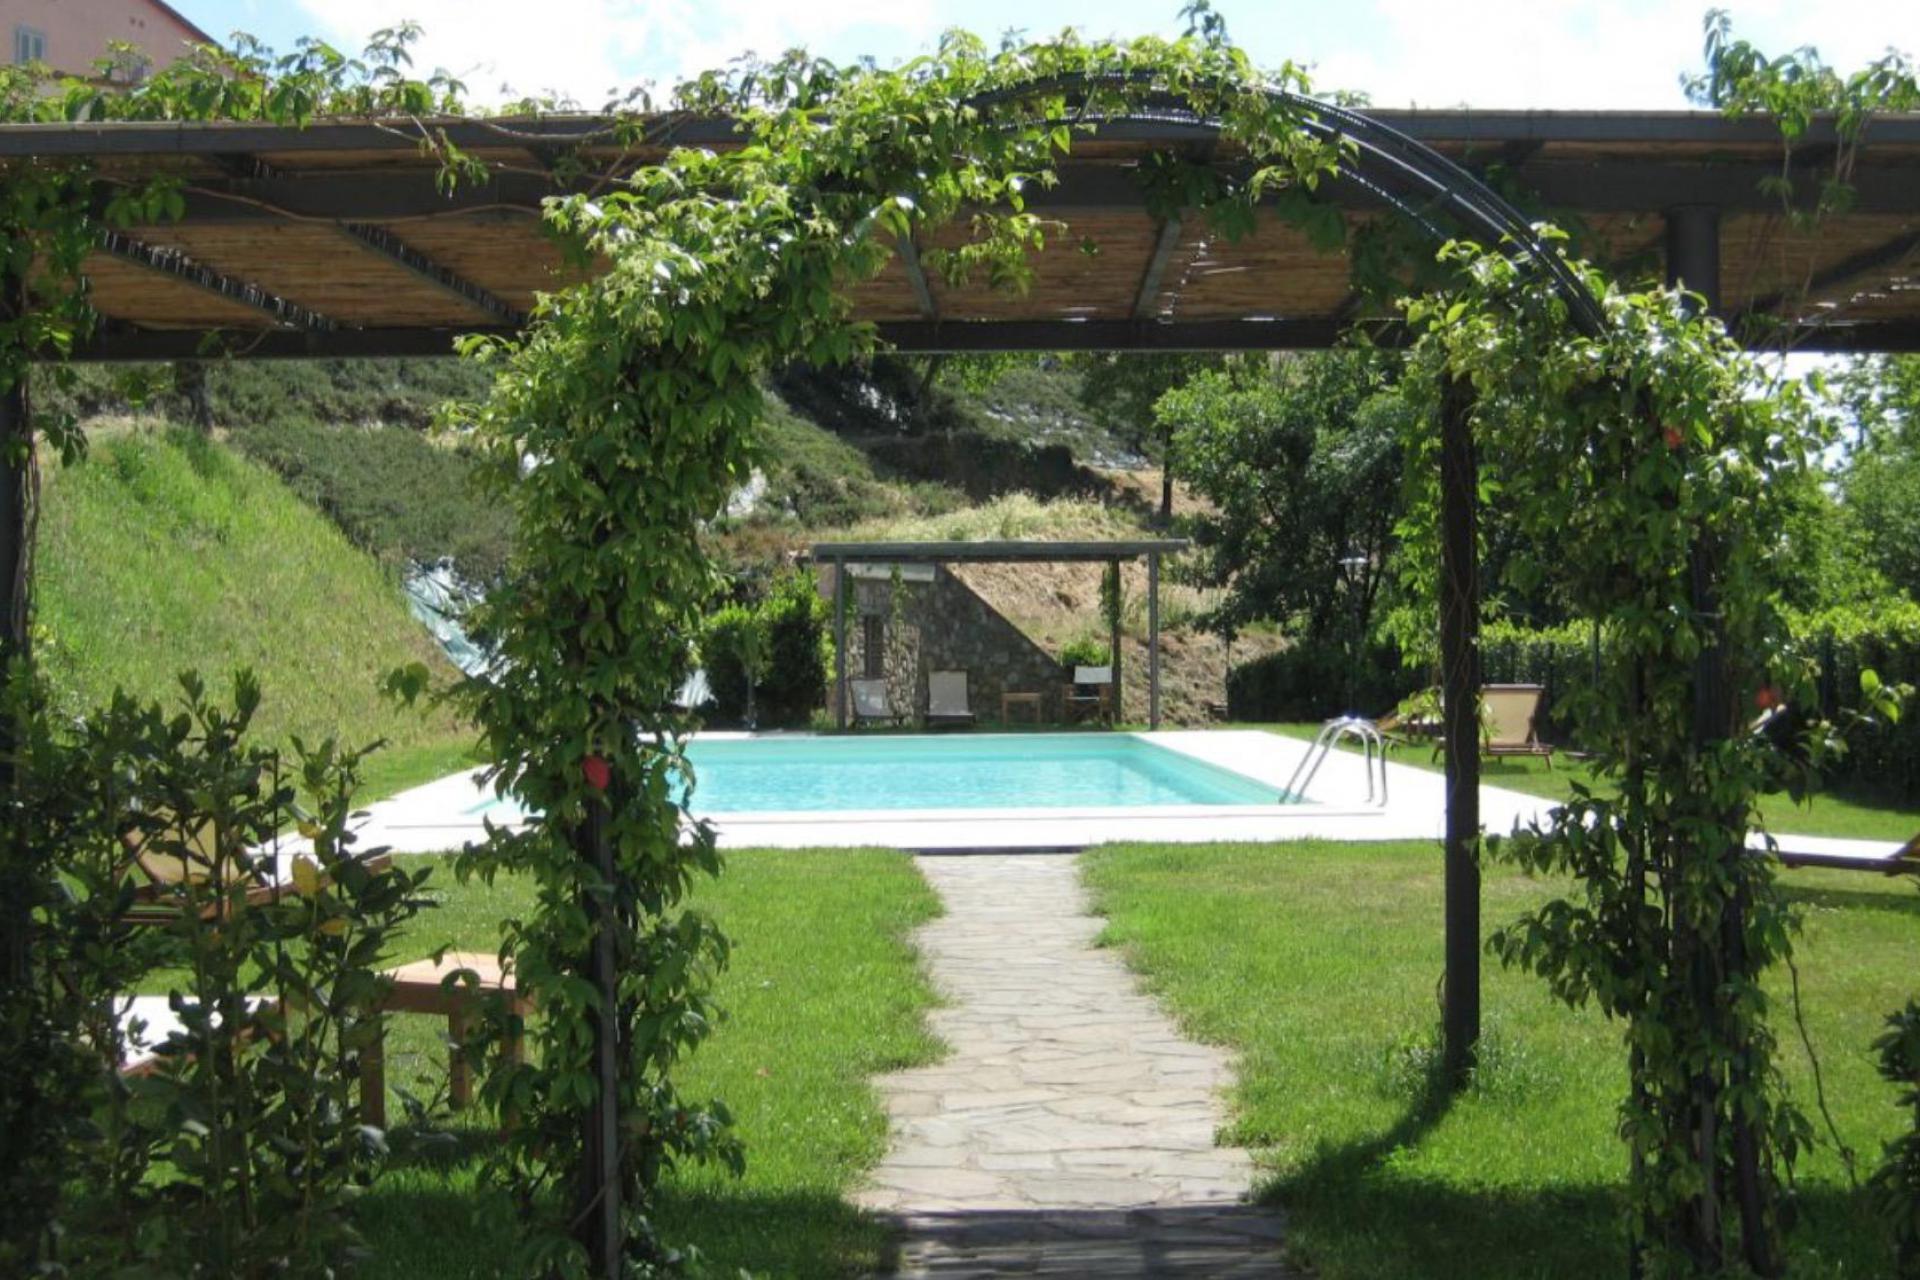 Ideal agriturismo for families with children